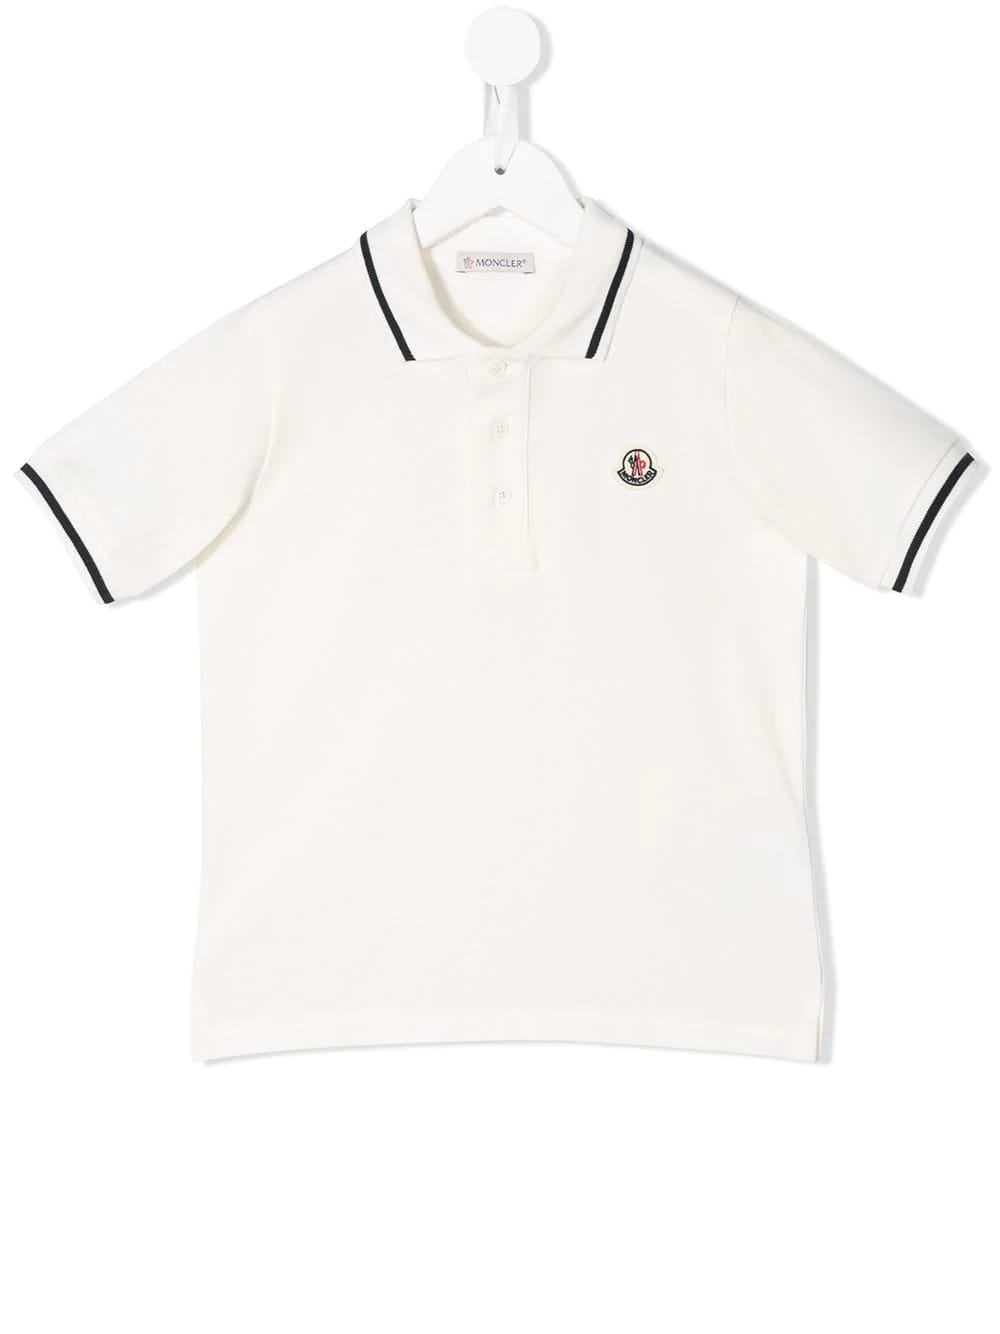 MONCLER WHITE POLO SHIRT WITH SMALL LOGO AND CONTRAST PROFILES,8A704-20 8496W 034